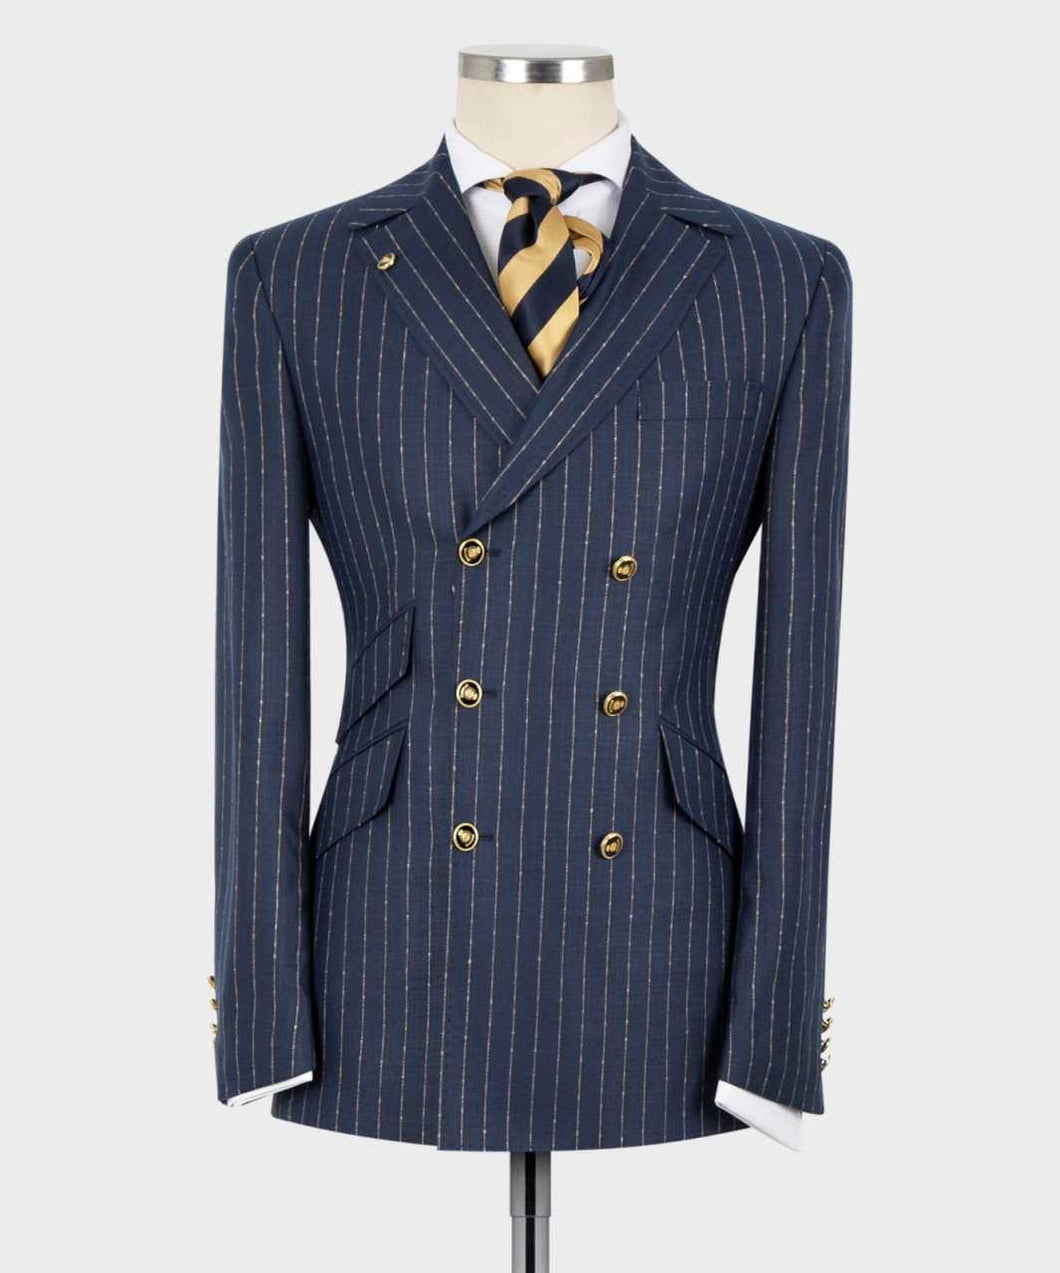 Men’s double-breasted Navy Blue 2Pc Suit